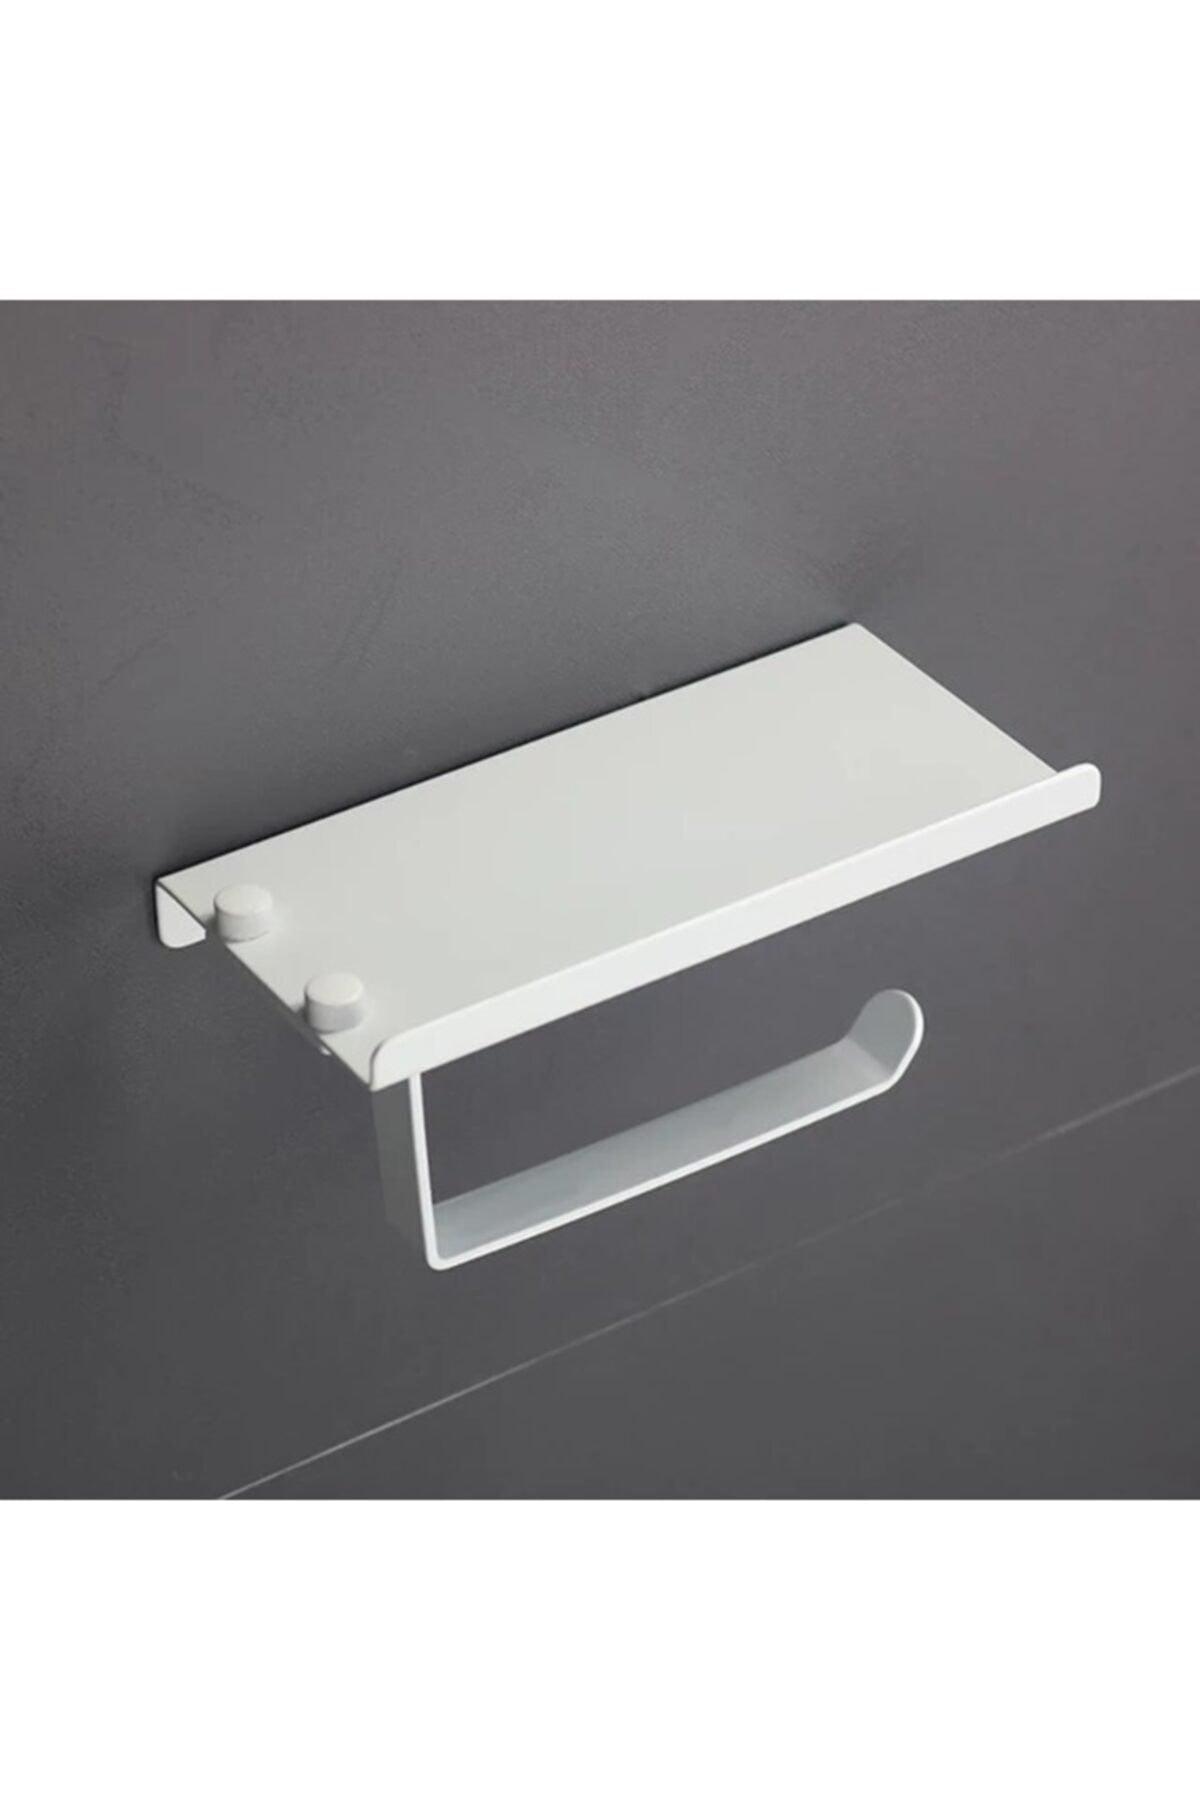 White Mobile Toilet Roll Holder With Phone Shelf